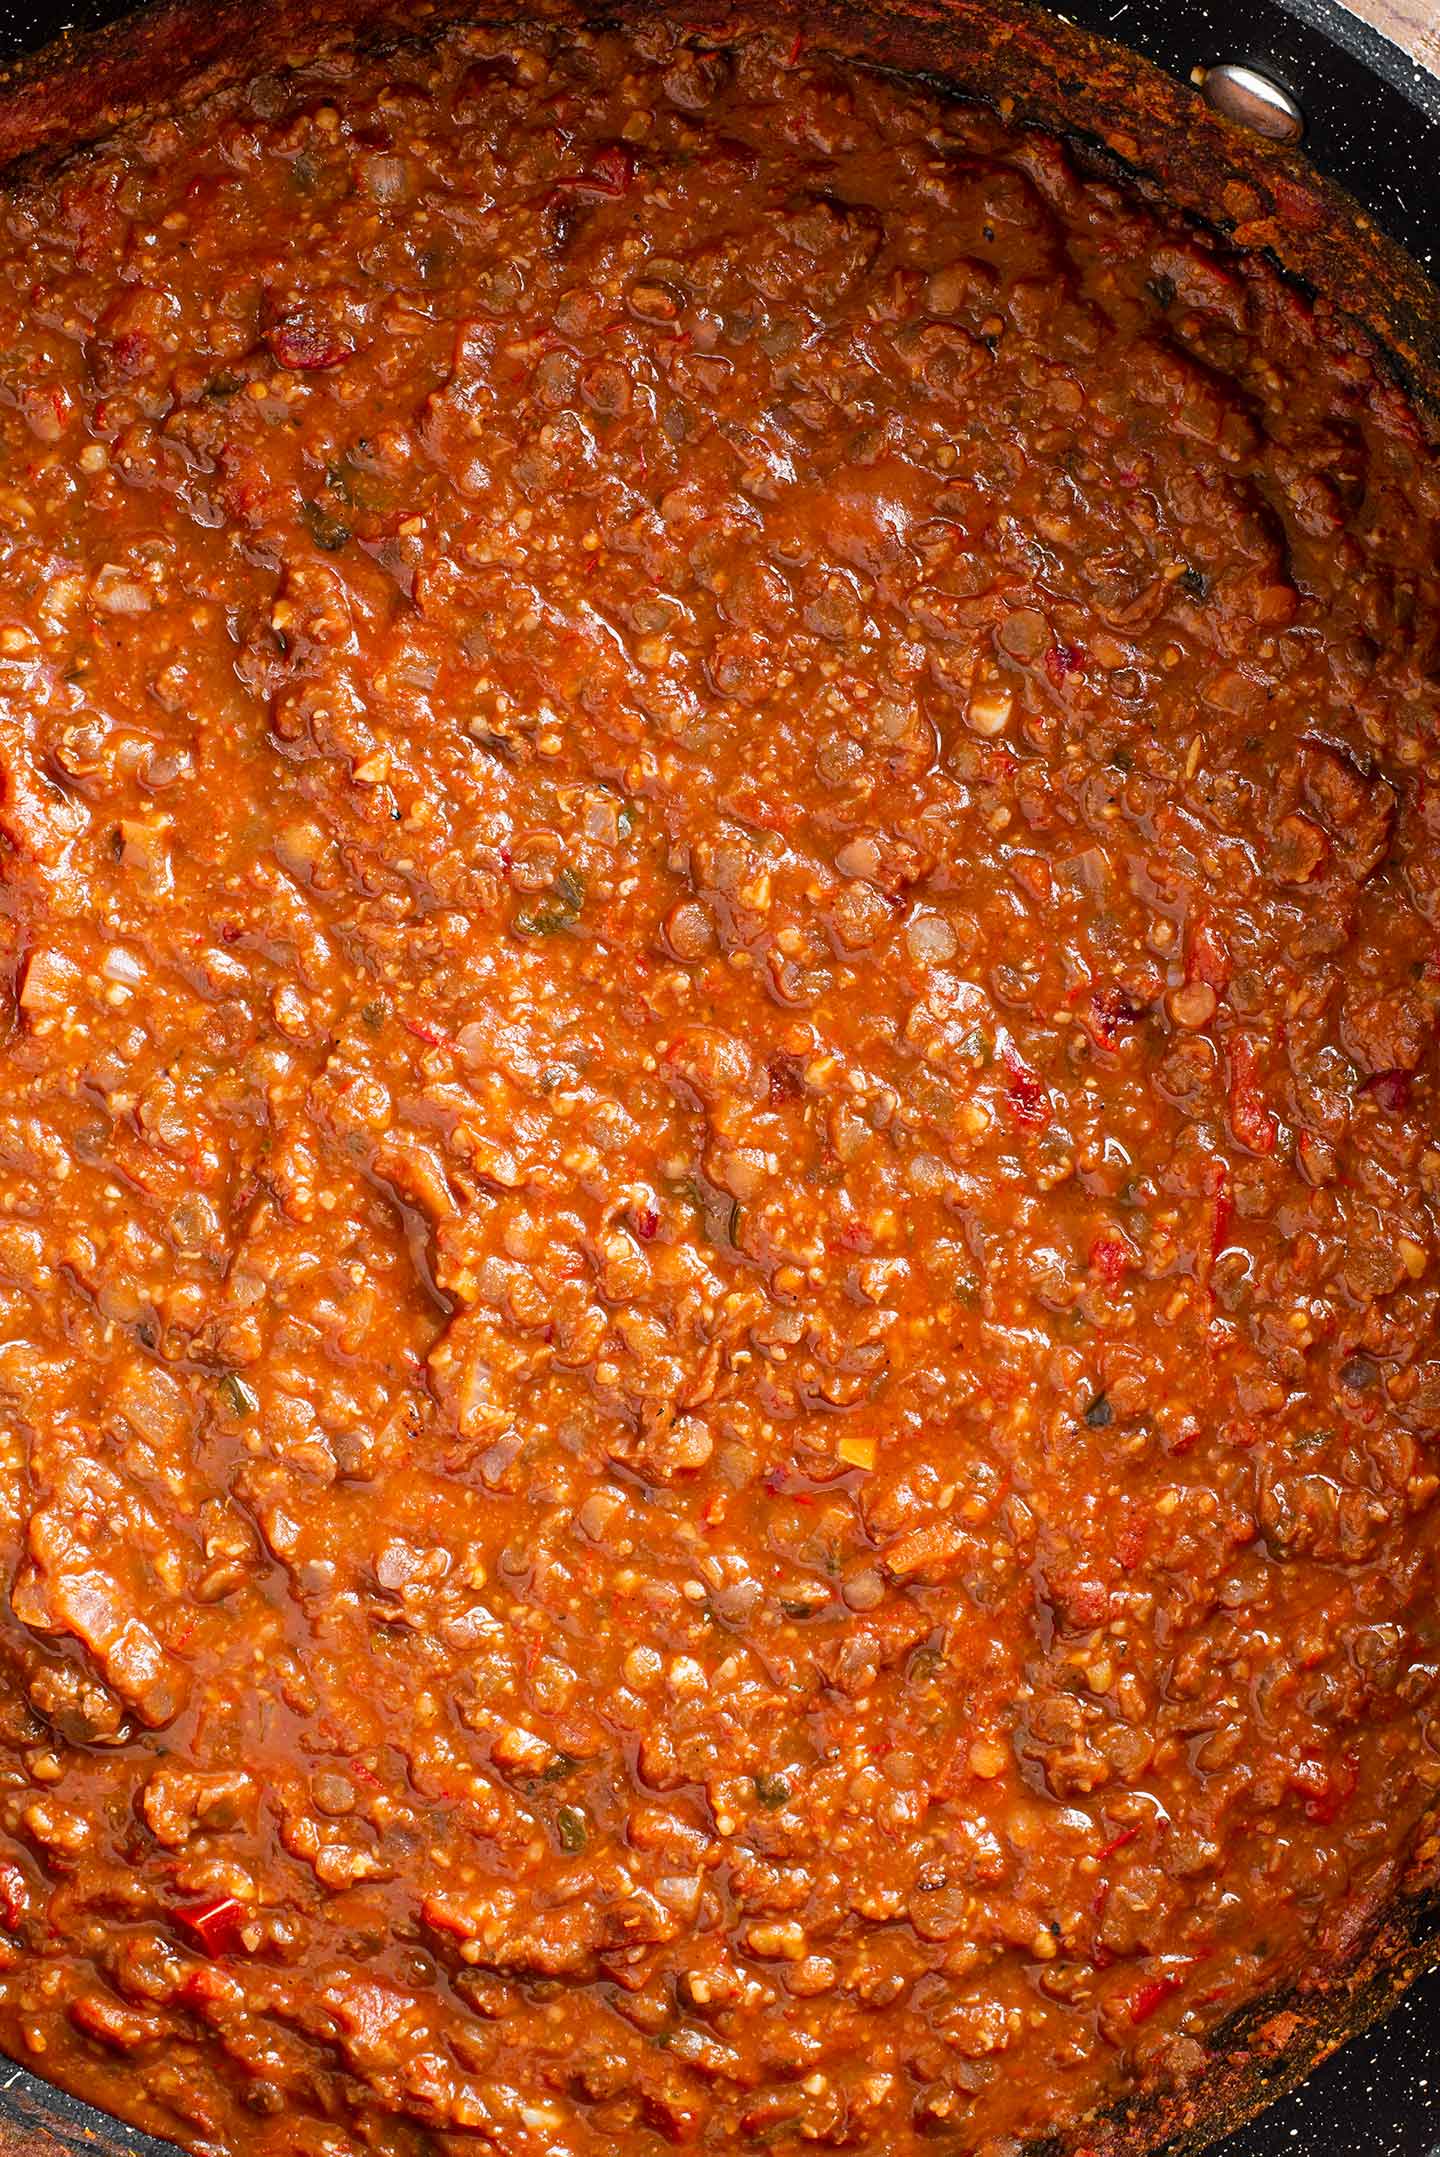 Top down view of the finished red lentil vegan "ragu" in the saute pan. The sauce is a warm red colour and has a hearty texture.